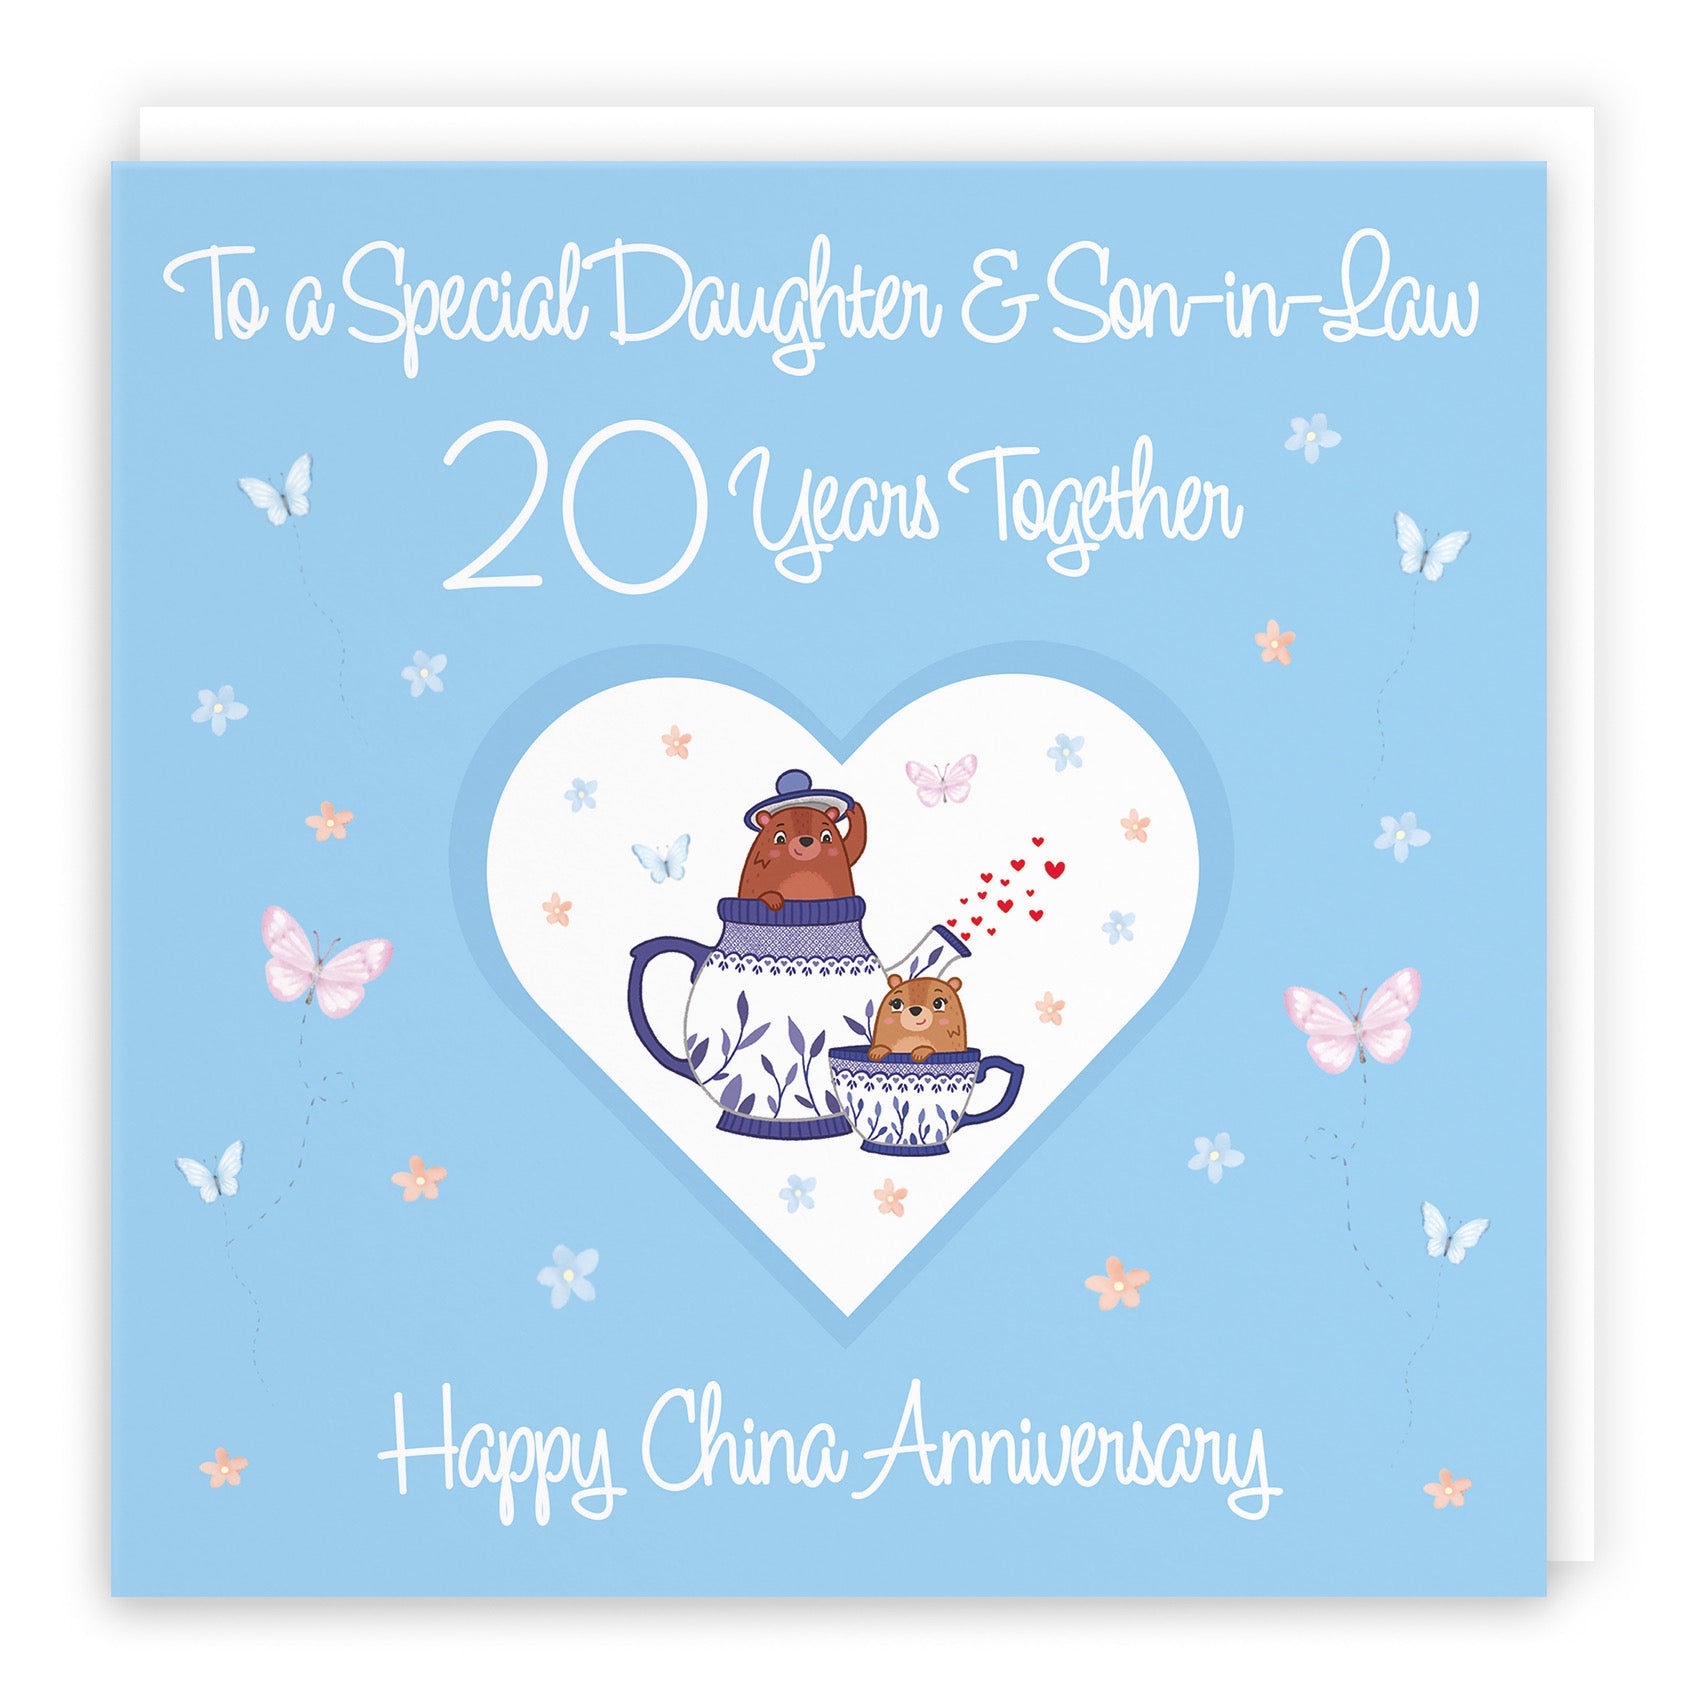 Large Daughter & Son-in-Law 20th Anniversary Card Romantic Meadows - Default Title (B0CXY2SLMZ)